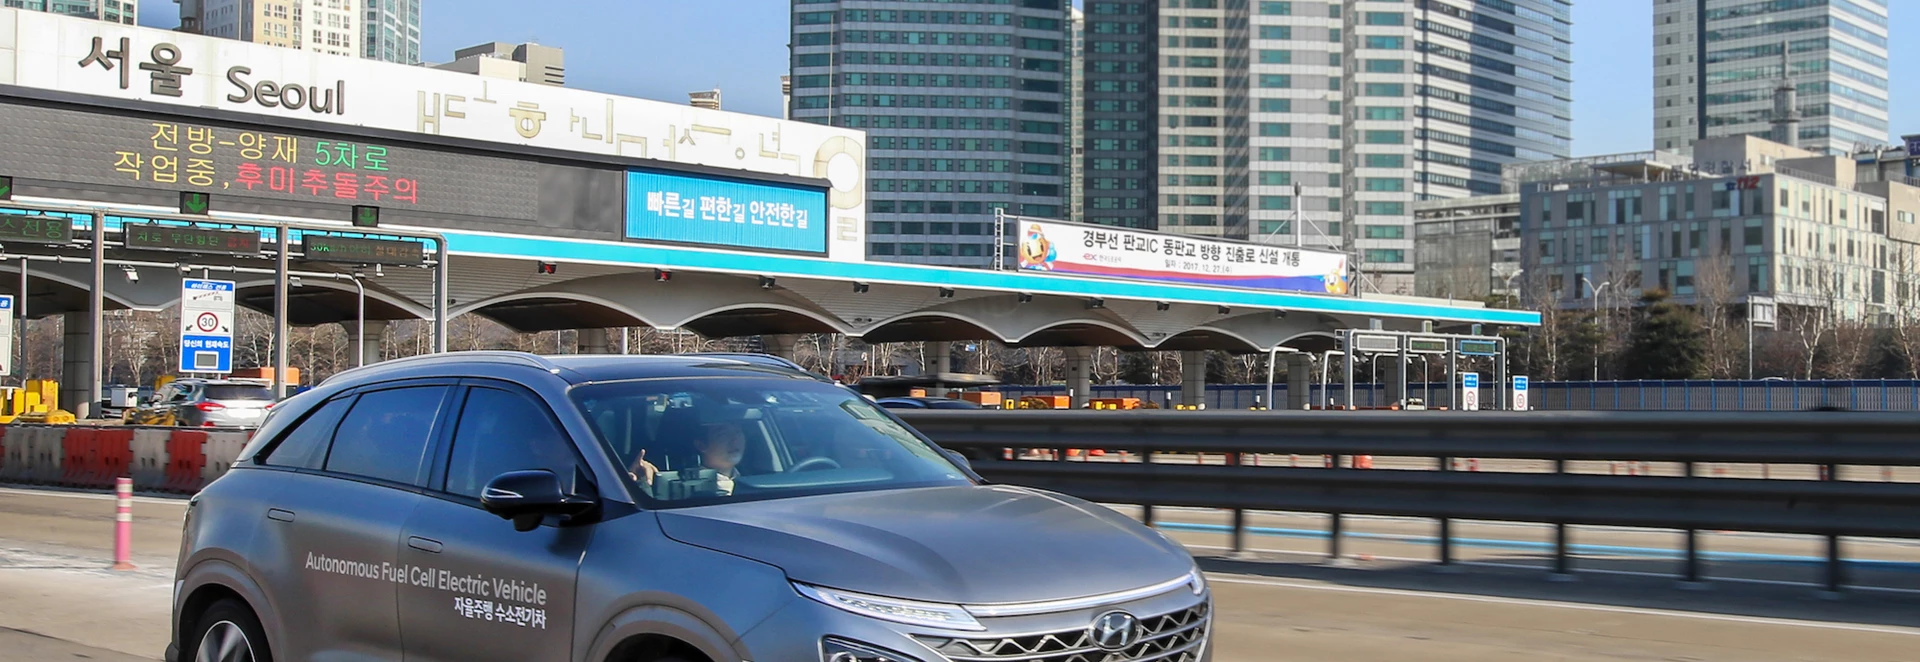 Hyundai trials world’s first self-driving fuel cell vehicle